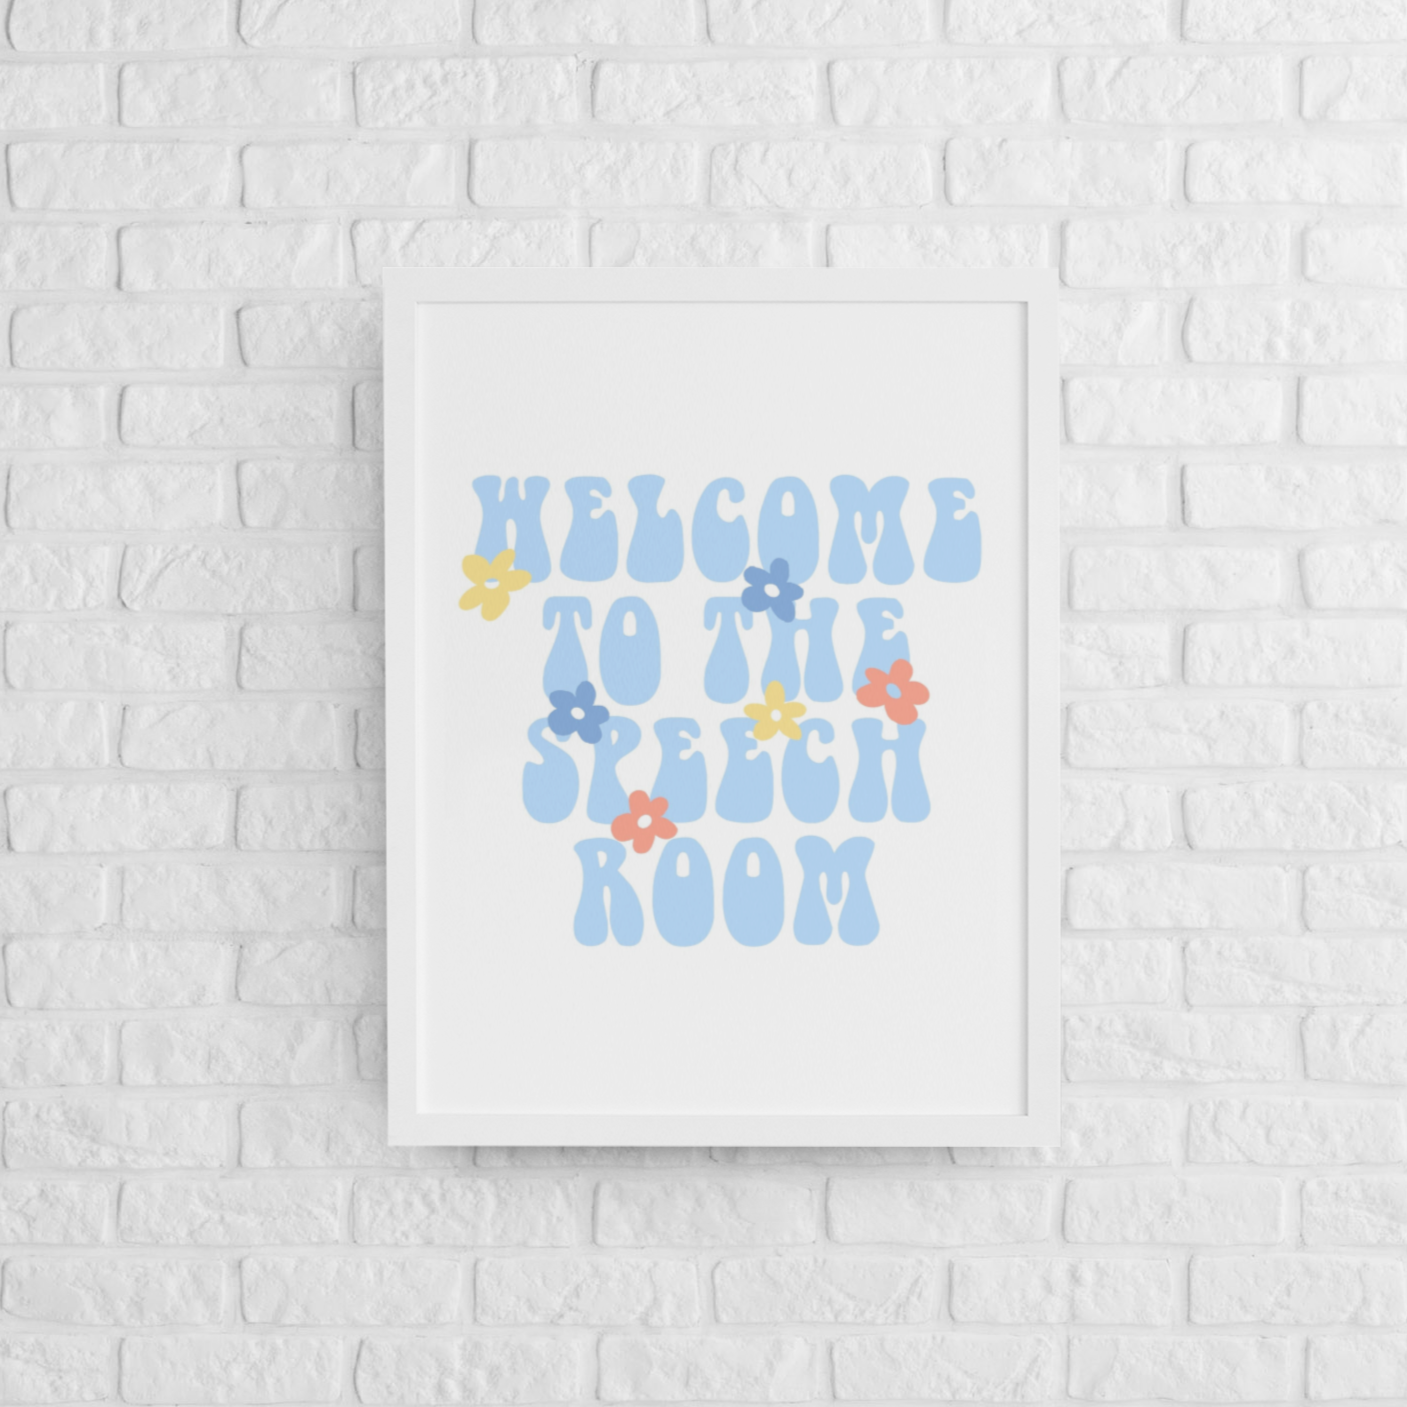 Welcome to the Speech Room Groovy Digital Print